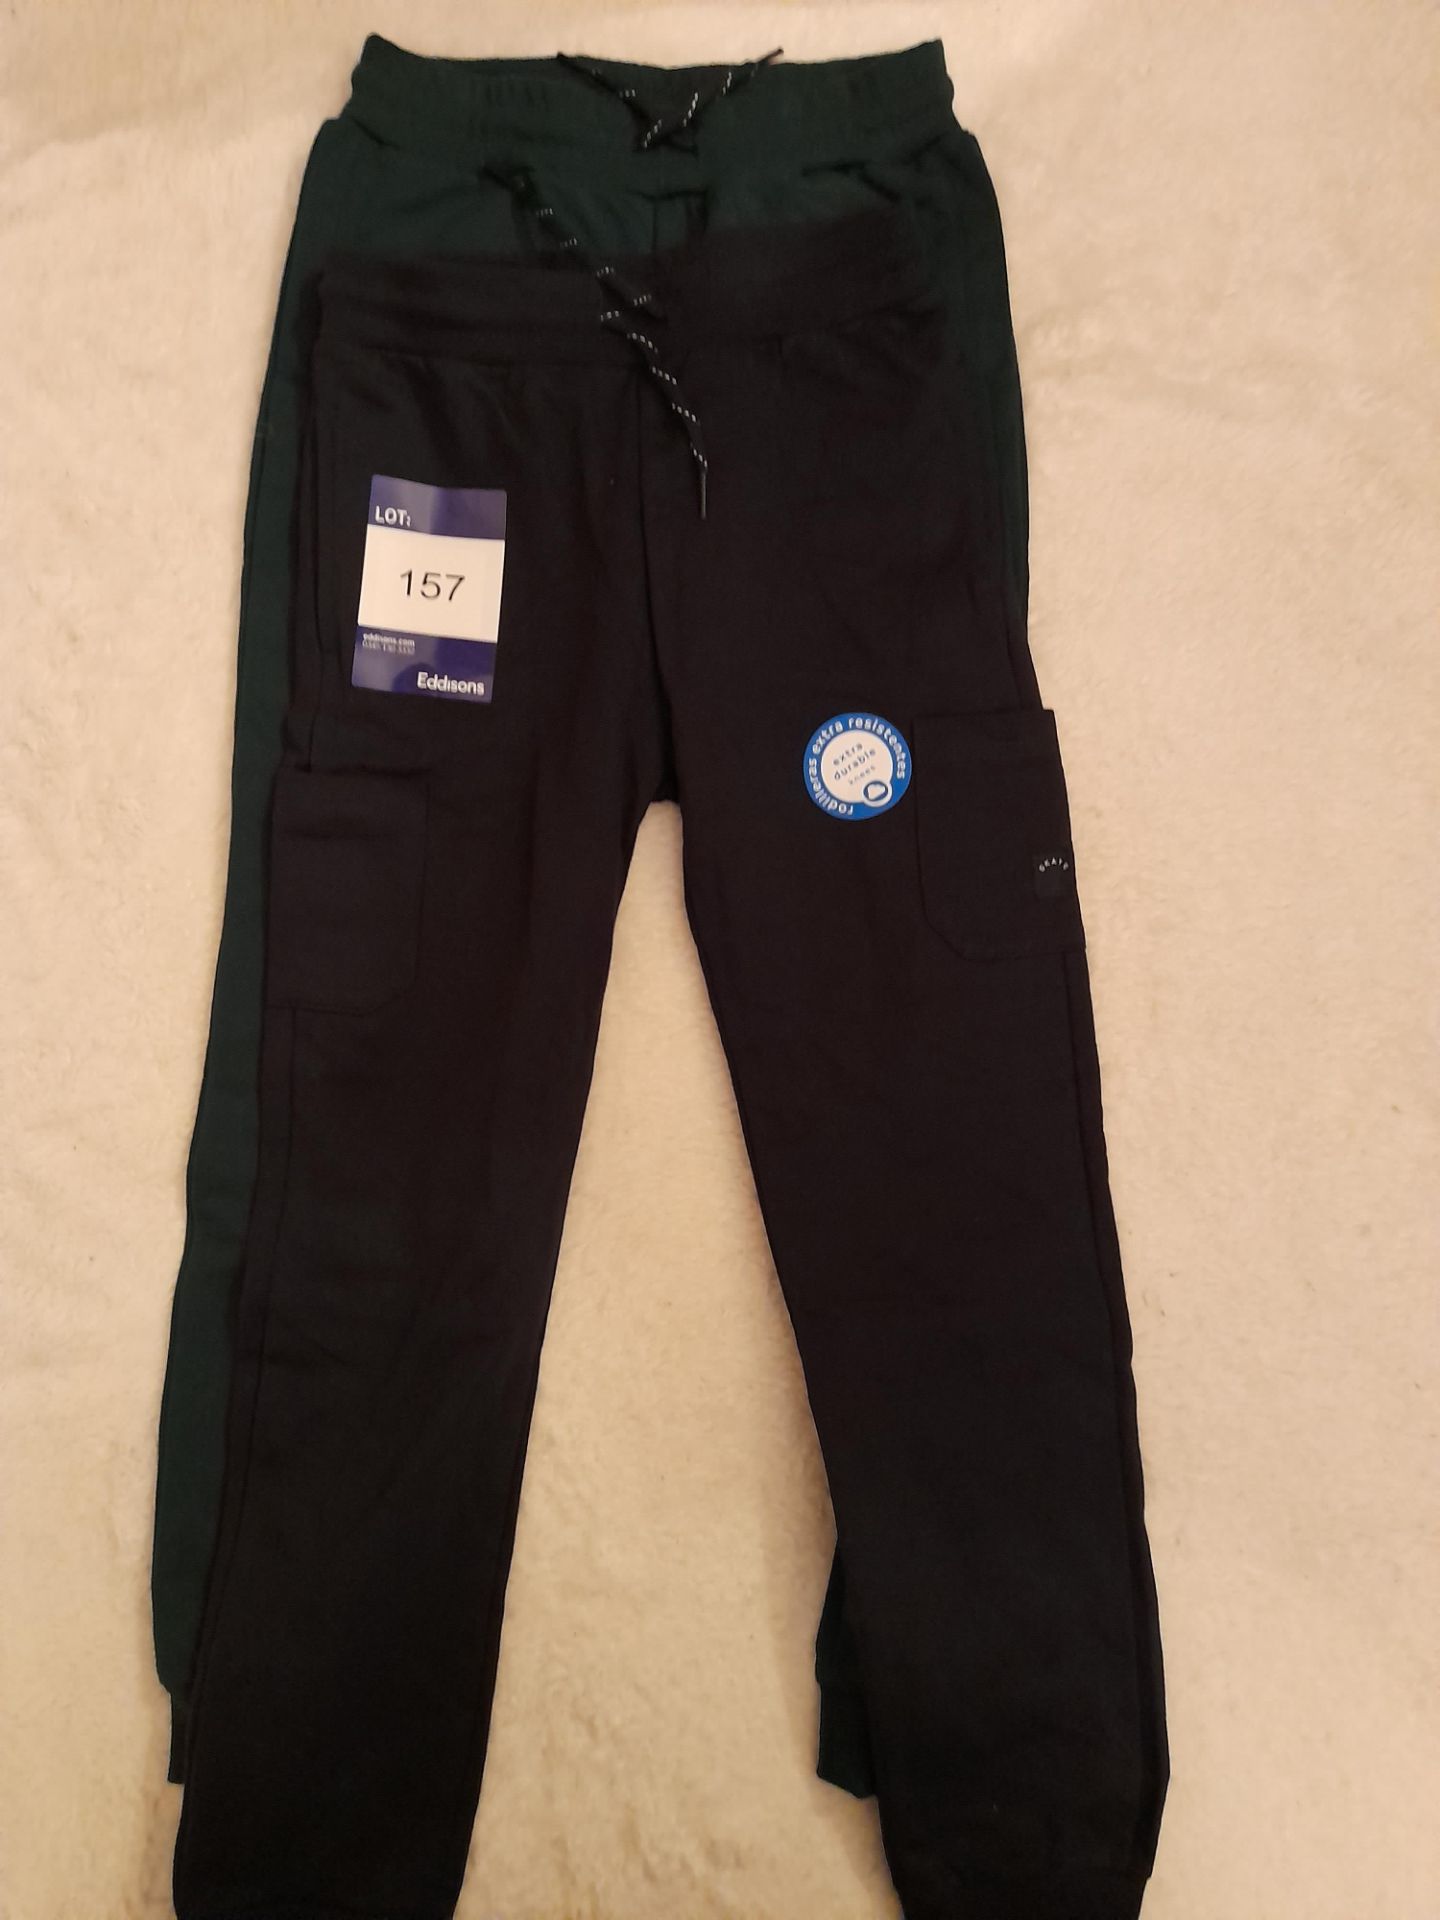 2 x Pairs of Mayoral joggers, 1 x black, 1 x green